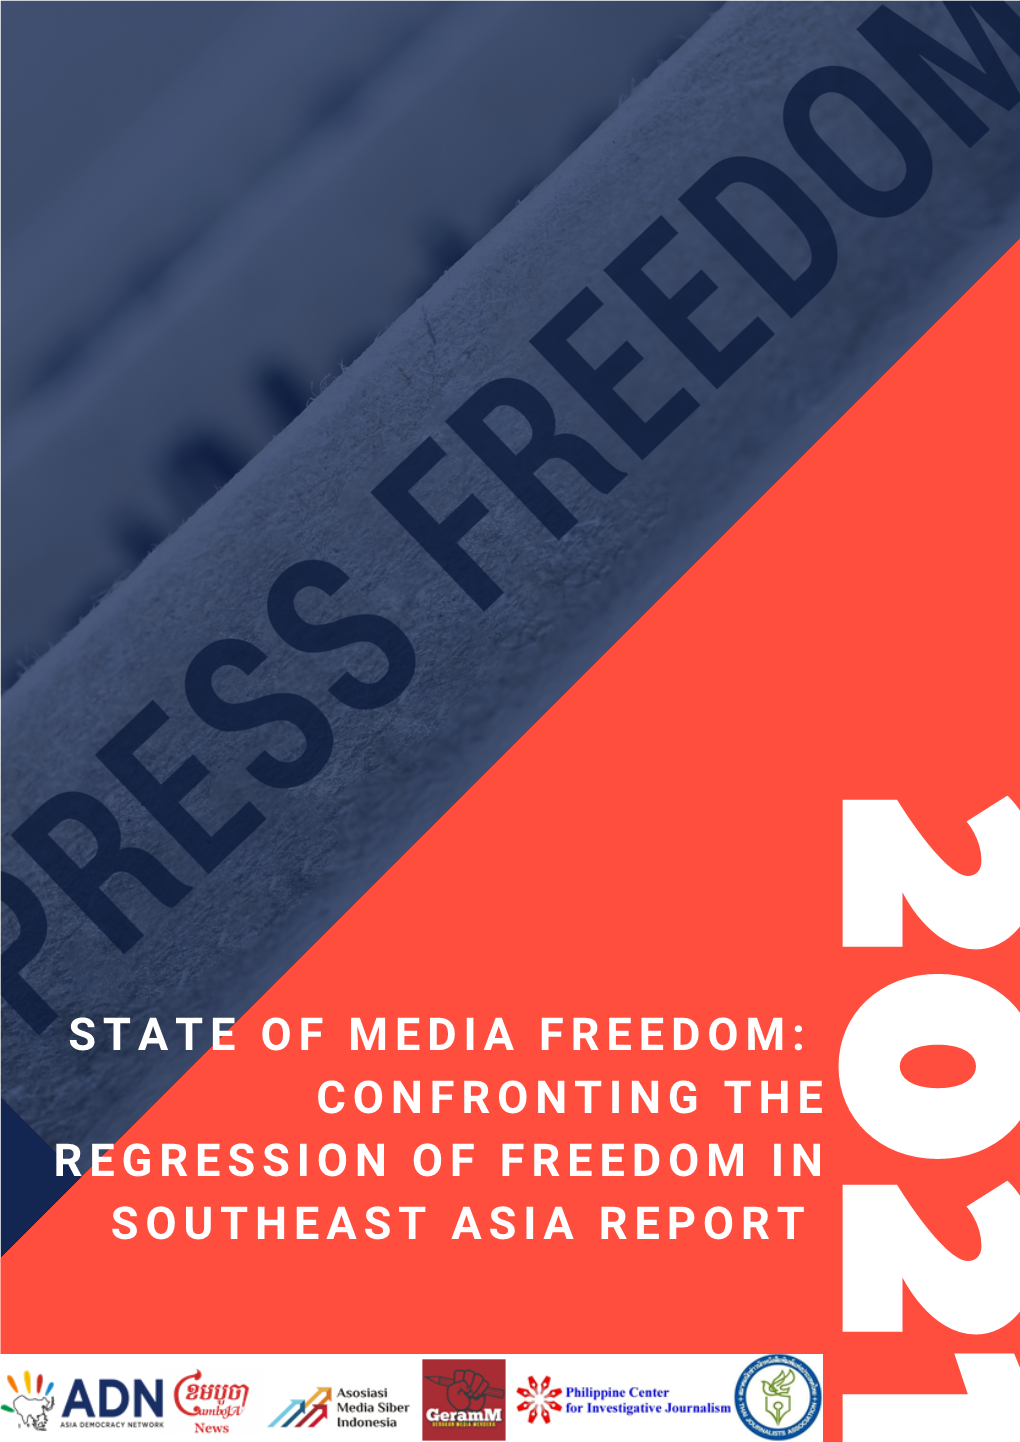 State of Media Freedom: Confronting the Regression of Freedom in Southeast Asia Report 2021